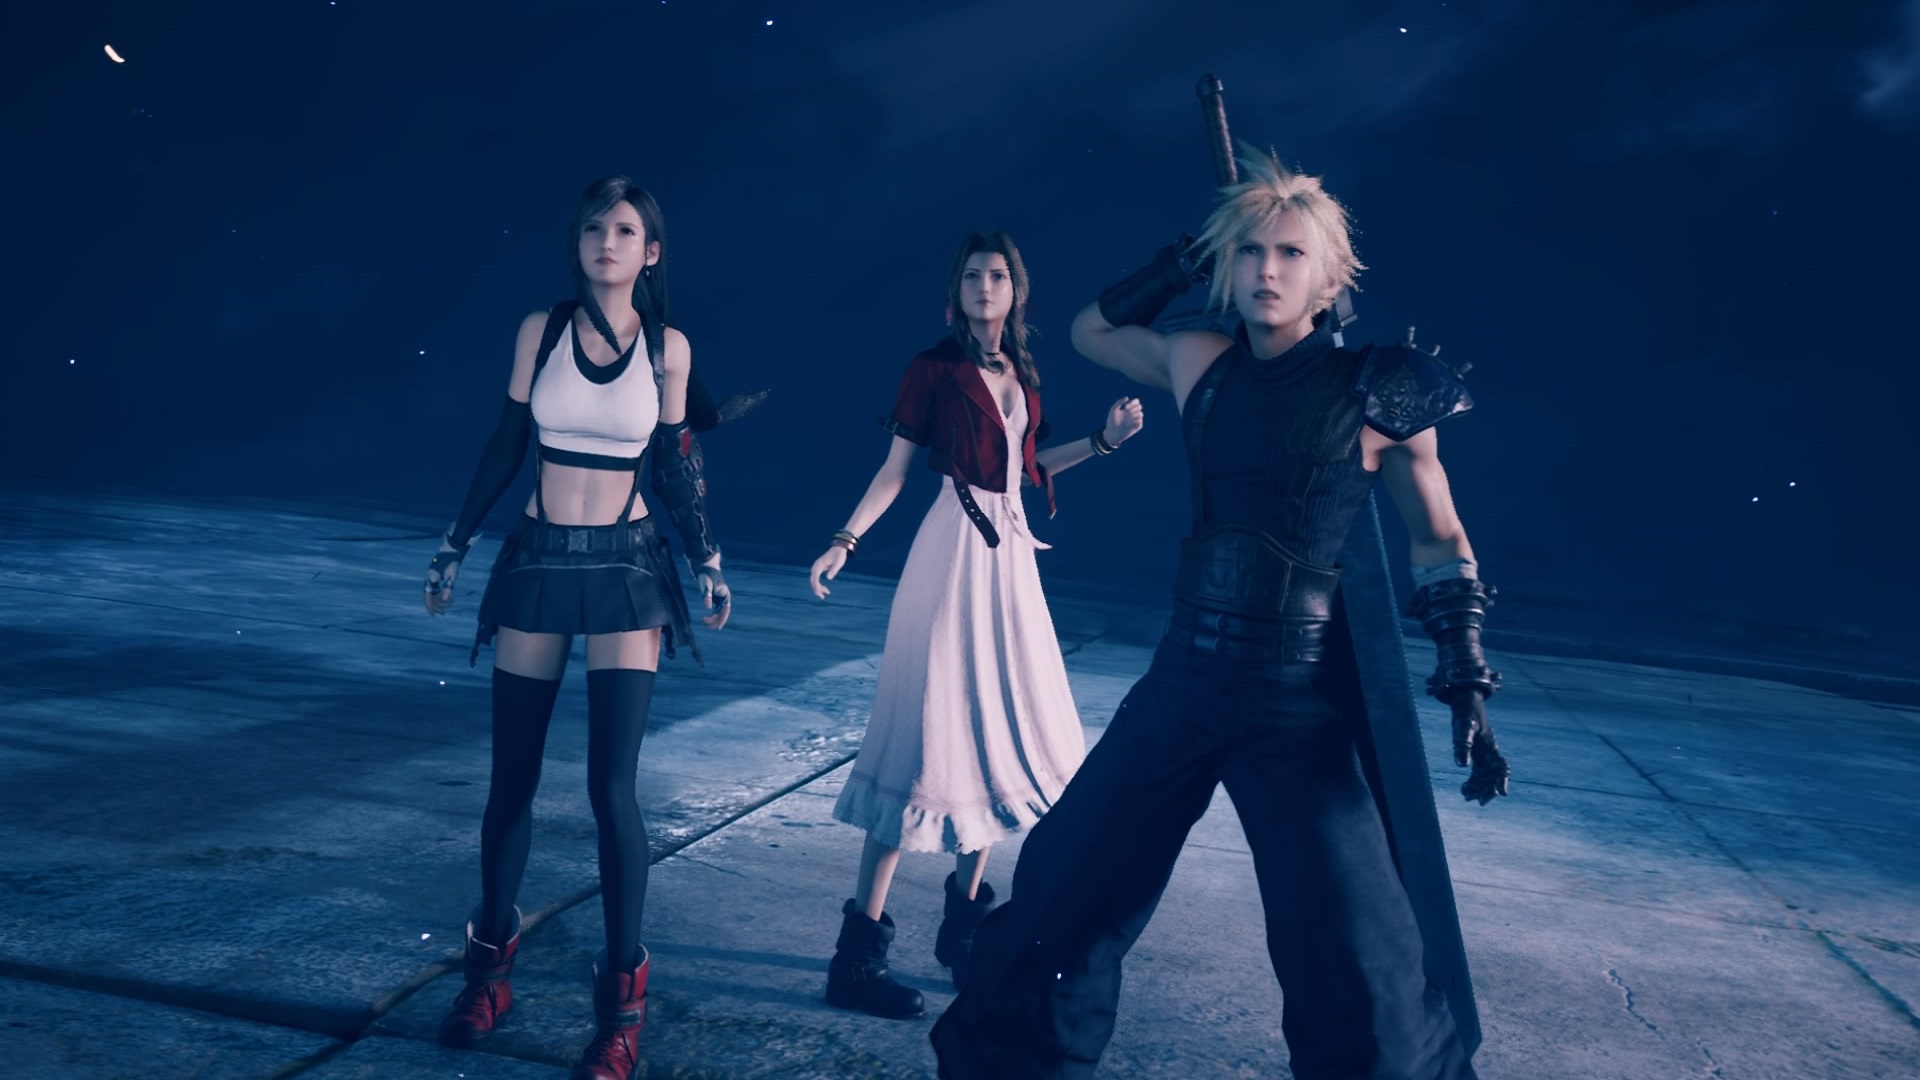 Cloud and other characters standing together